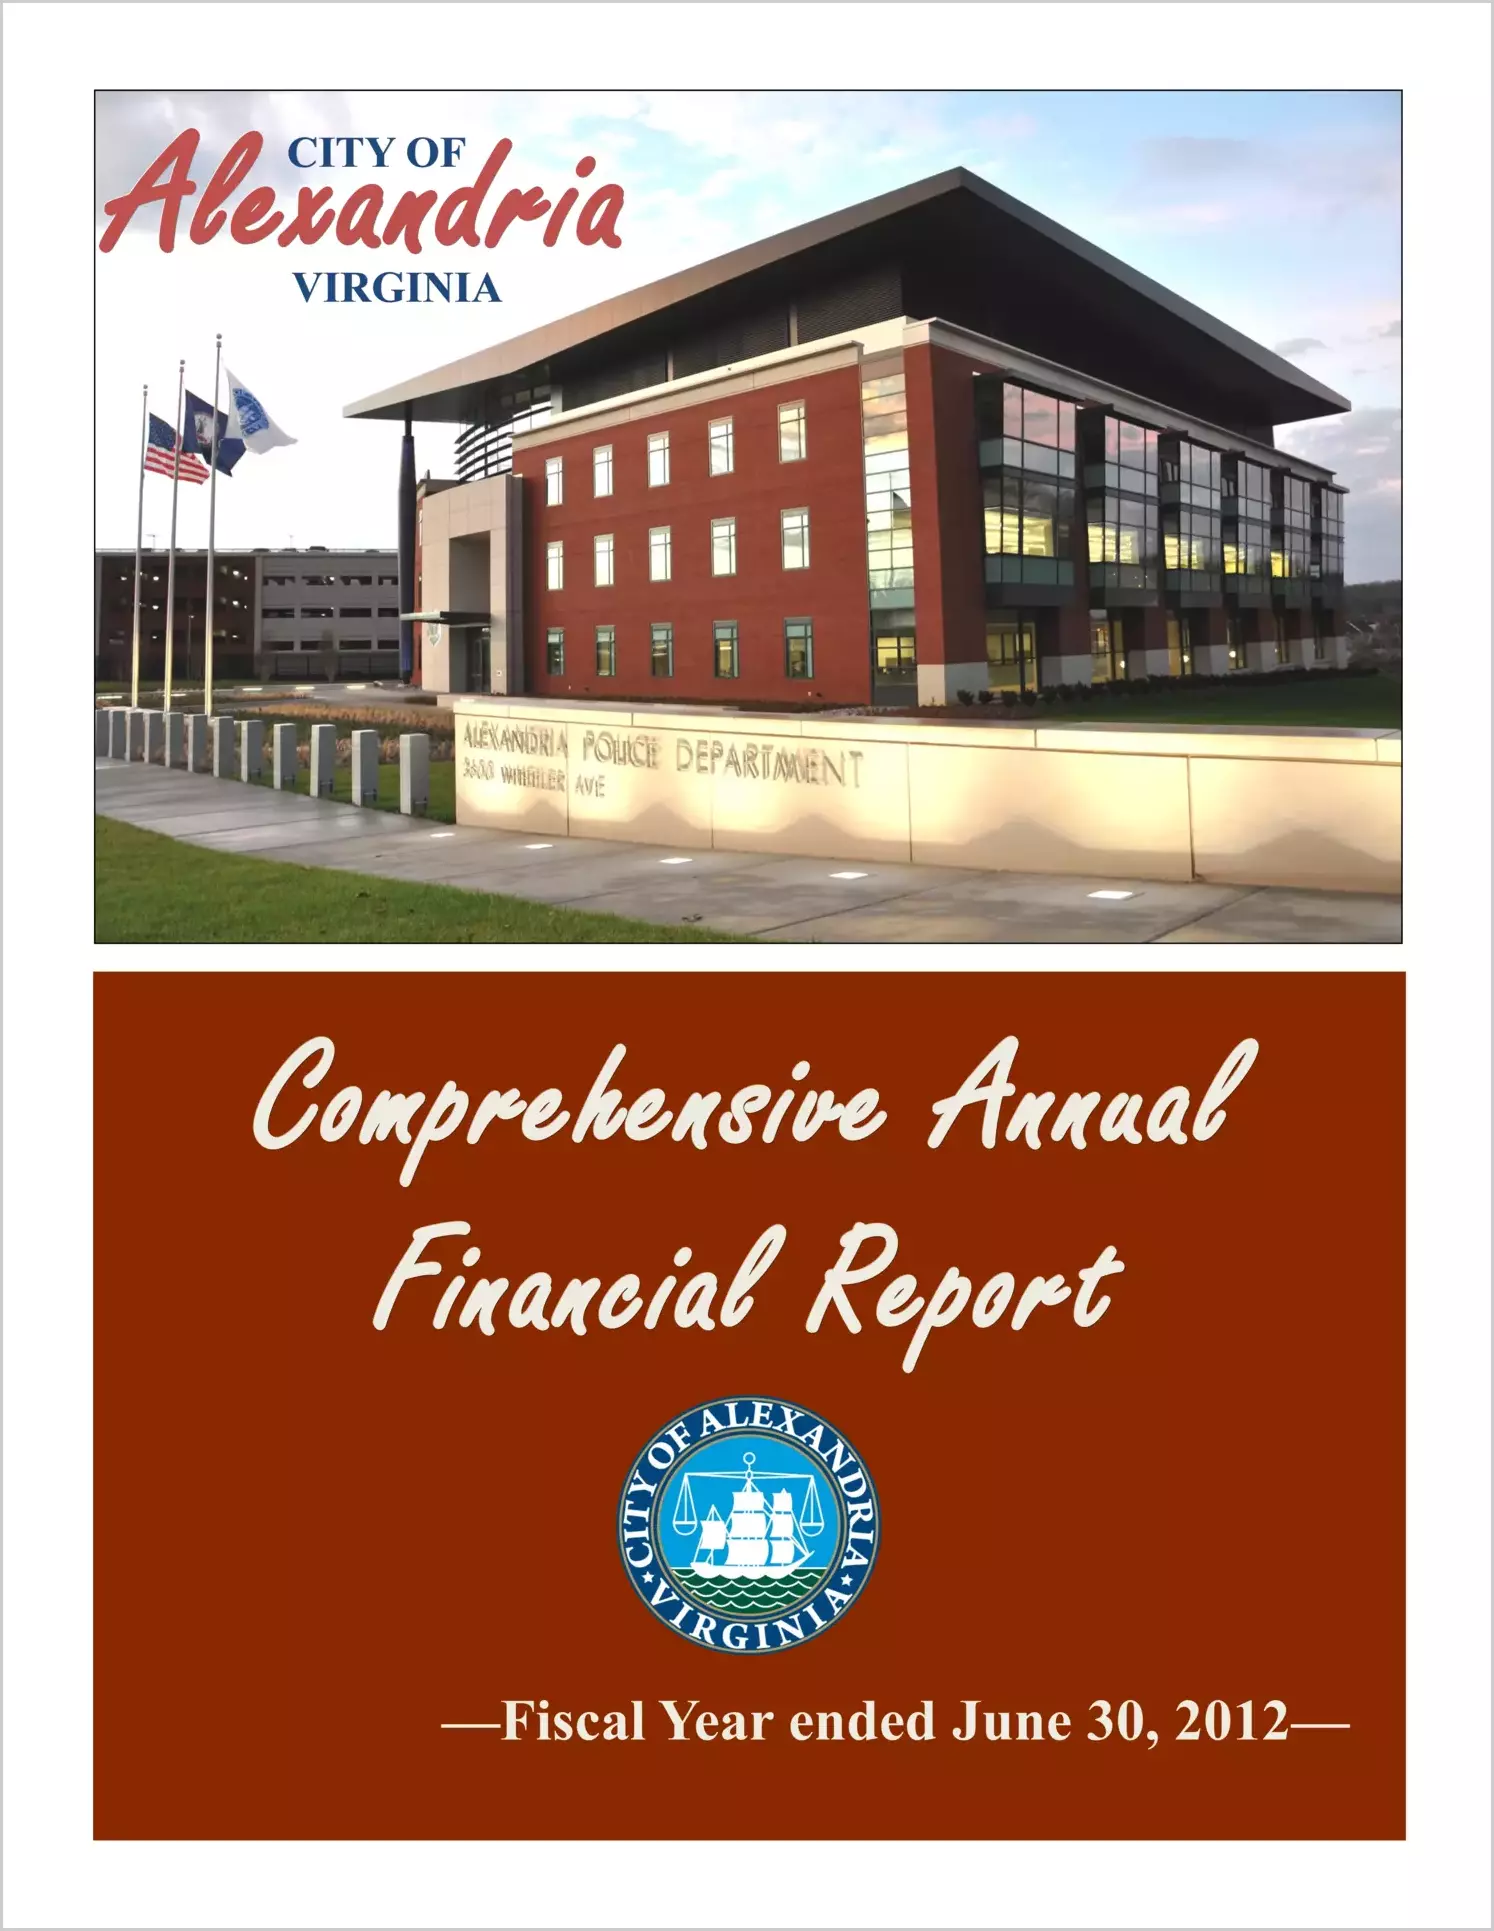 2012 Annual Financial Report for City of Alexandria